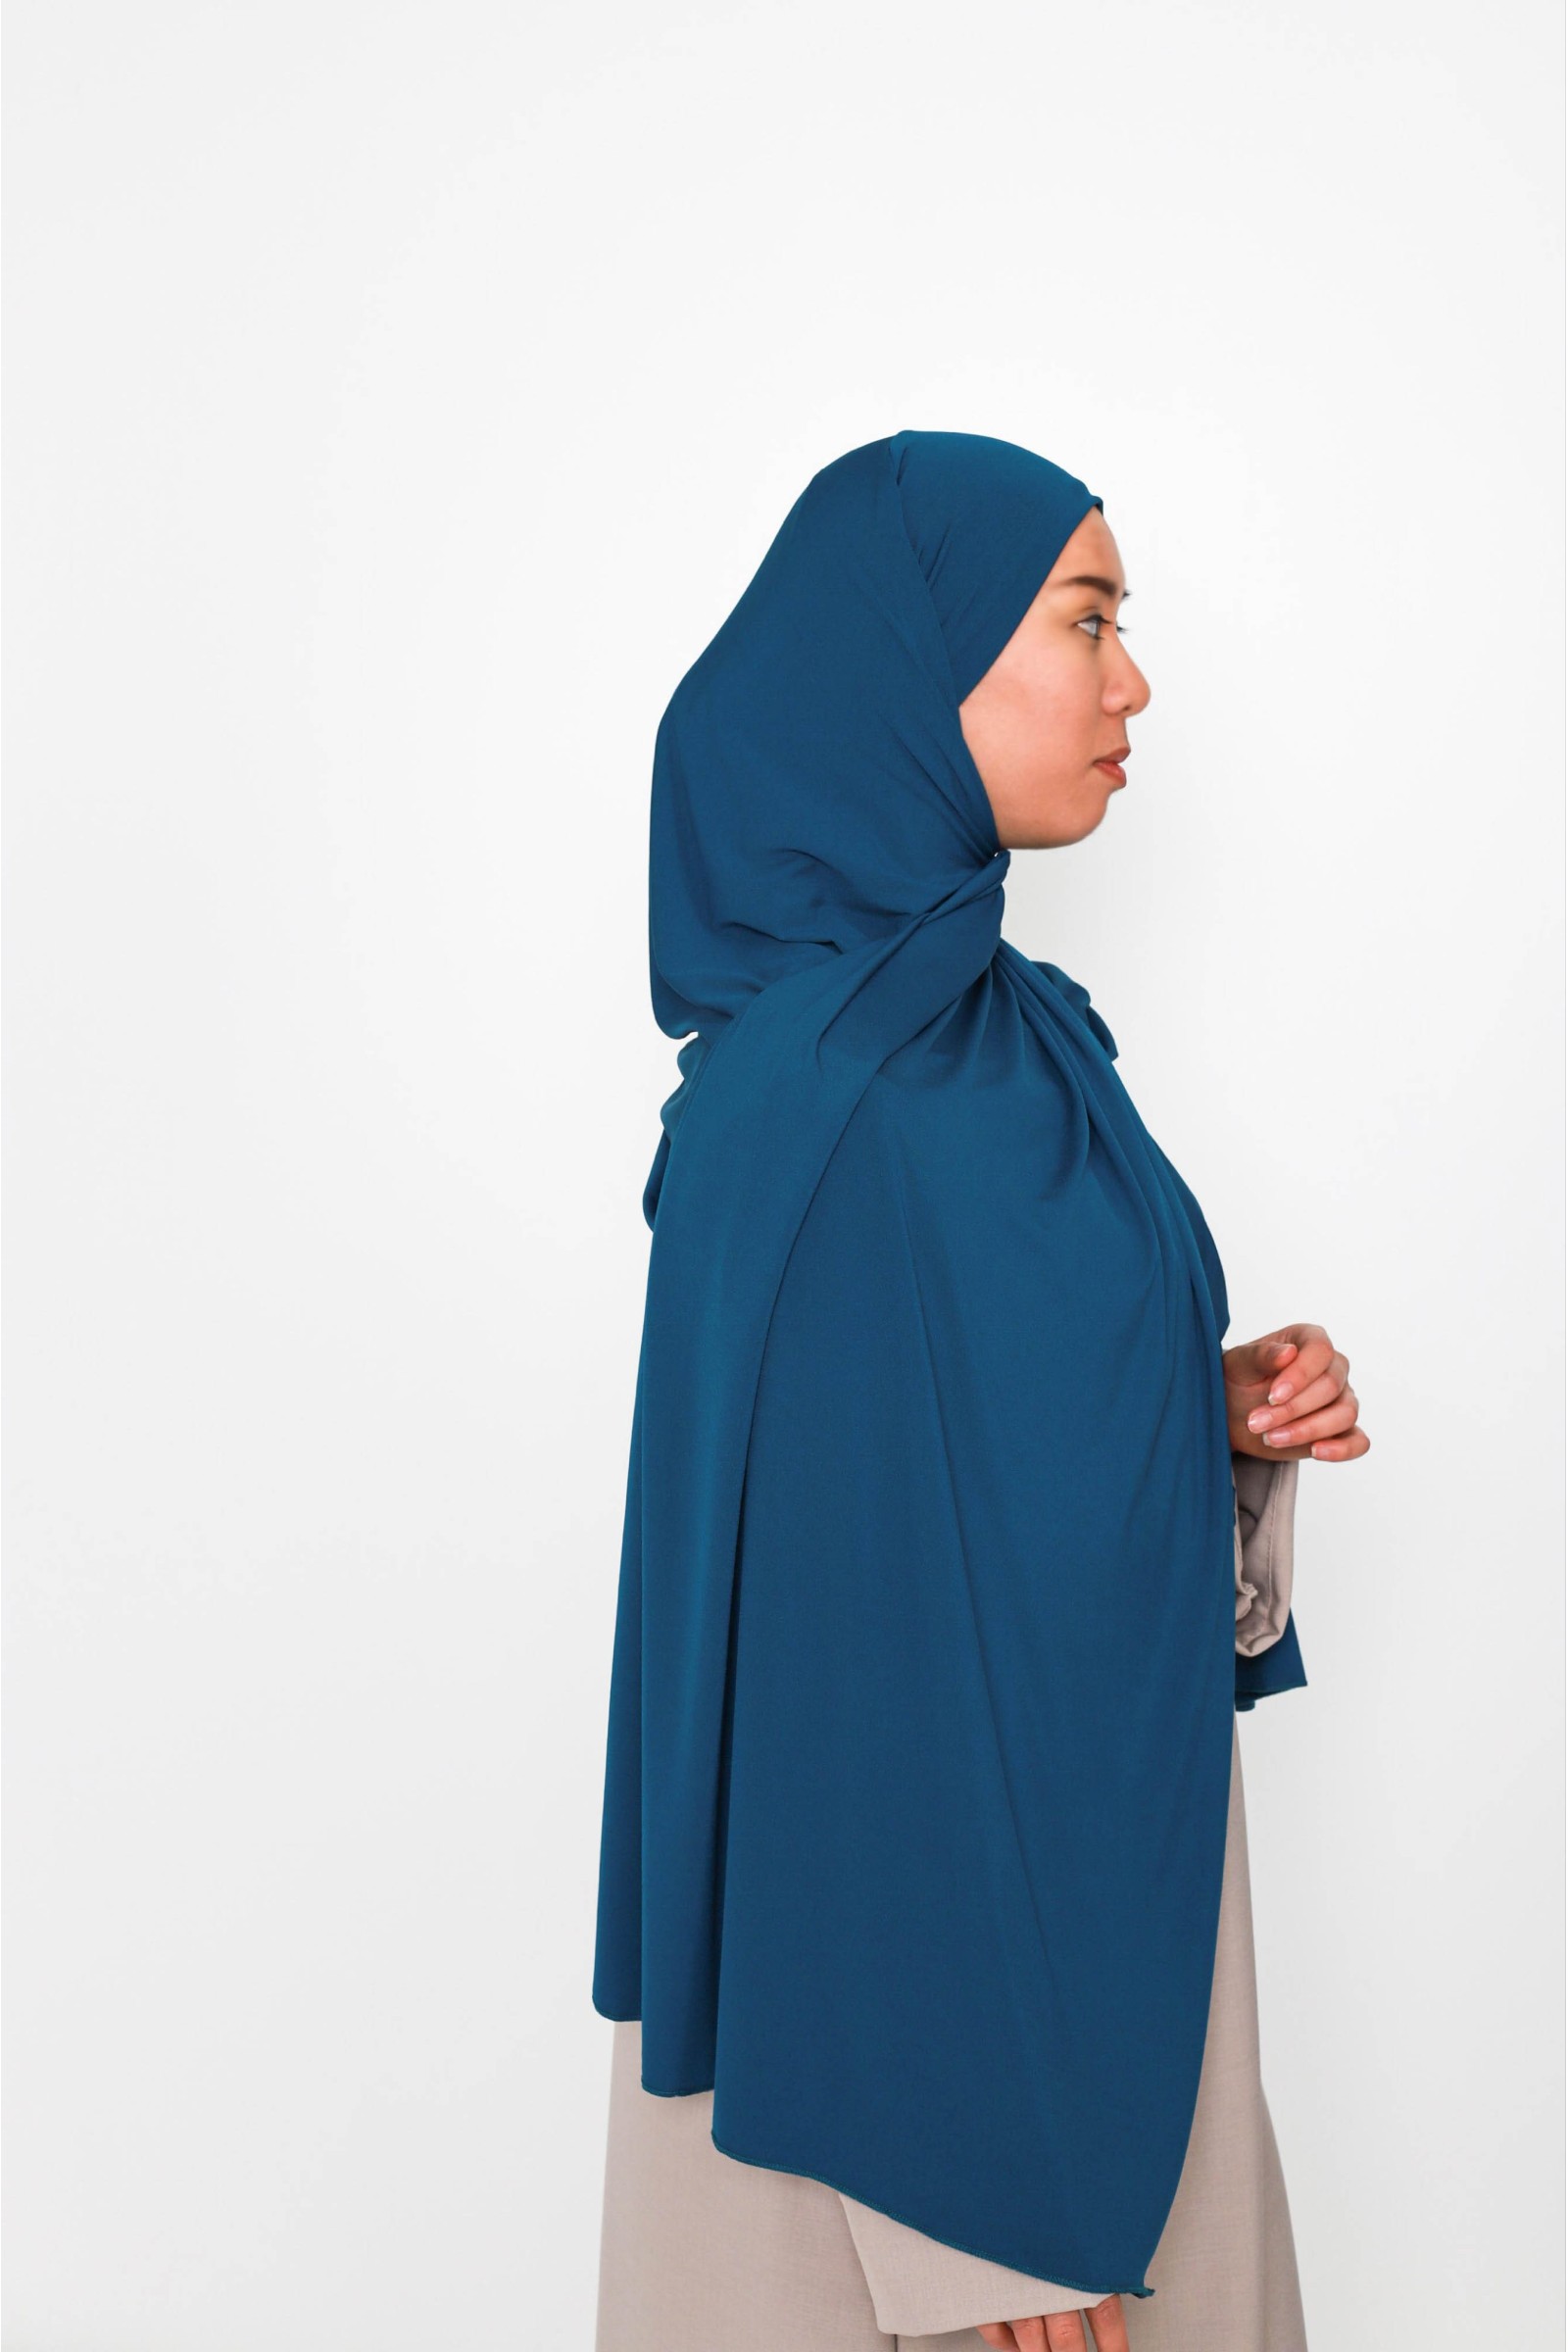 Practical veil to put on with headband ideal for Muslim women